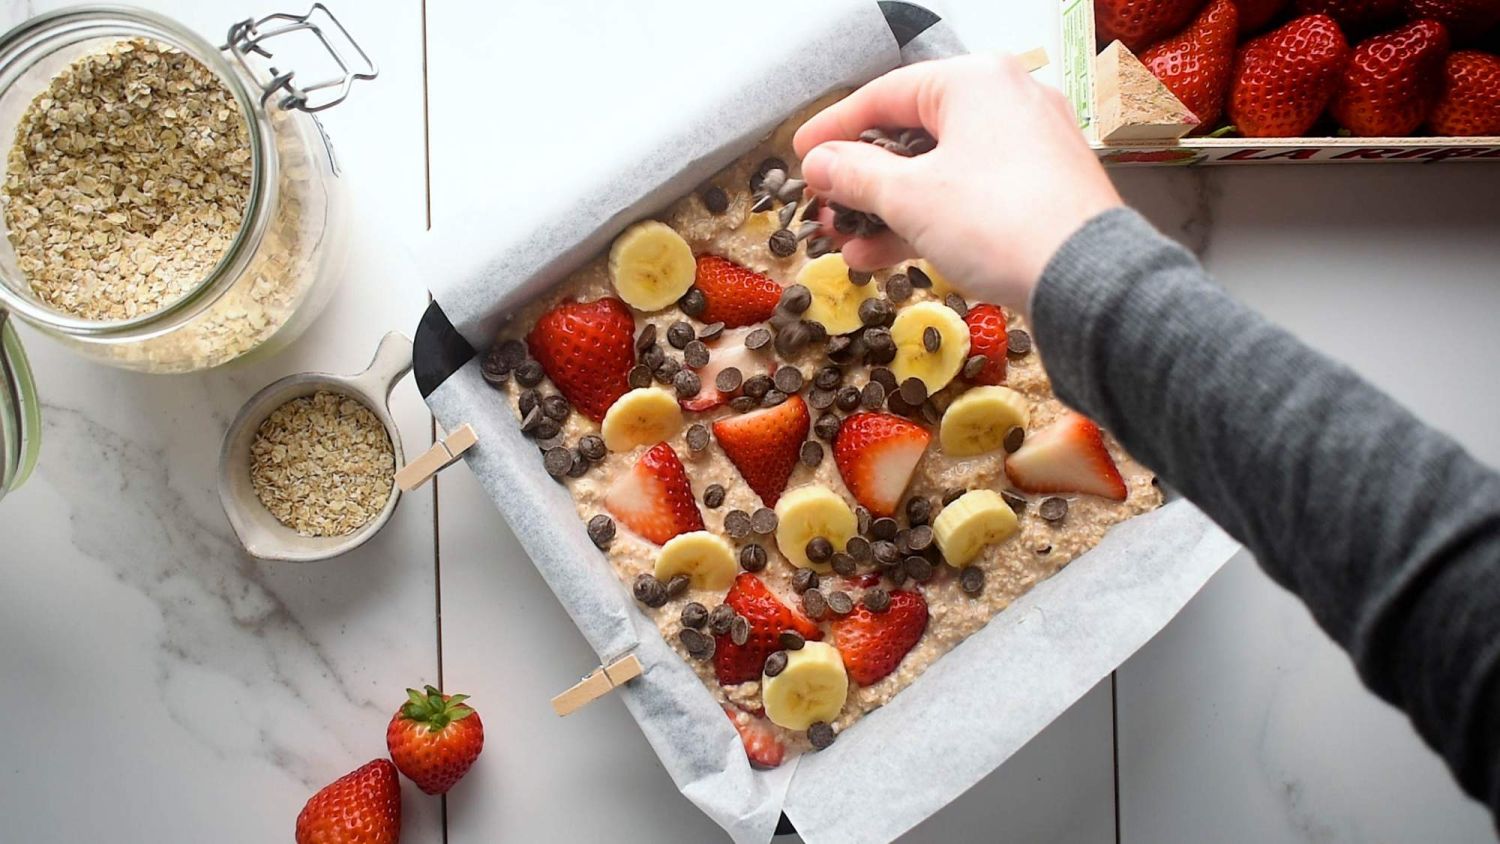 Chocolate chips being sprinlled on top of baked oatmeal with strawberries and bananas.